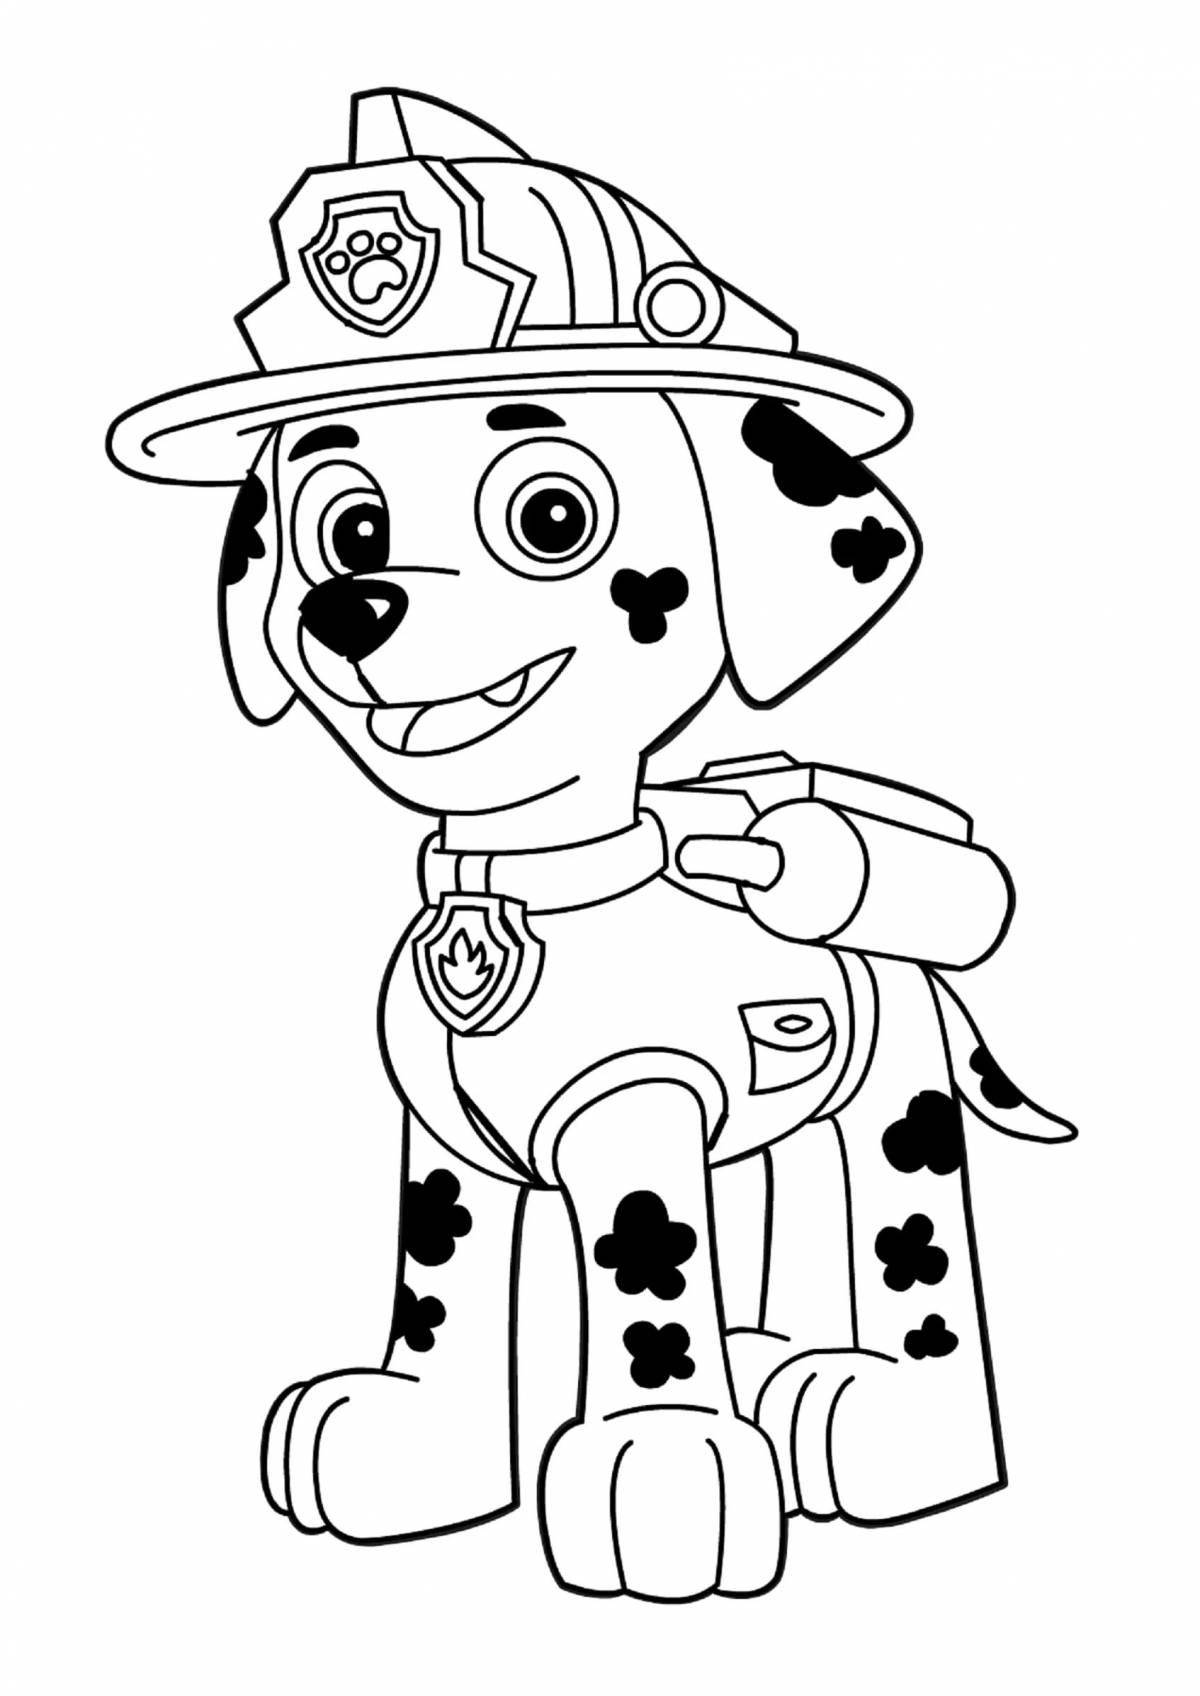 Colorful paw patrol coloring page for boys